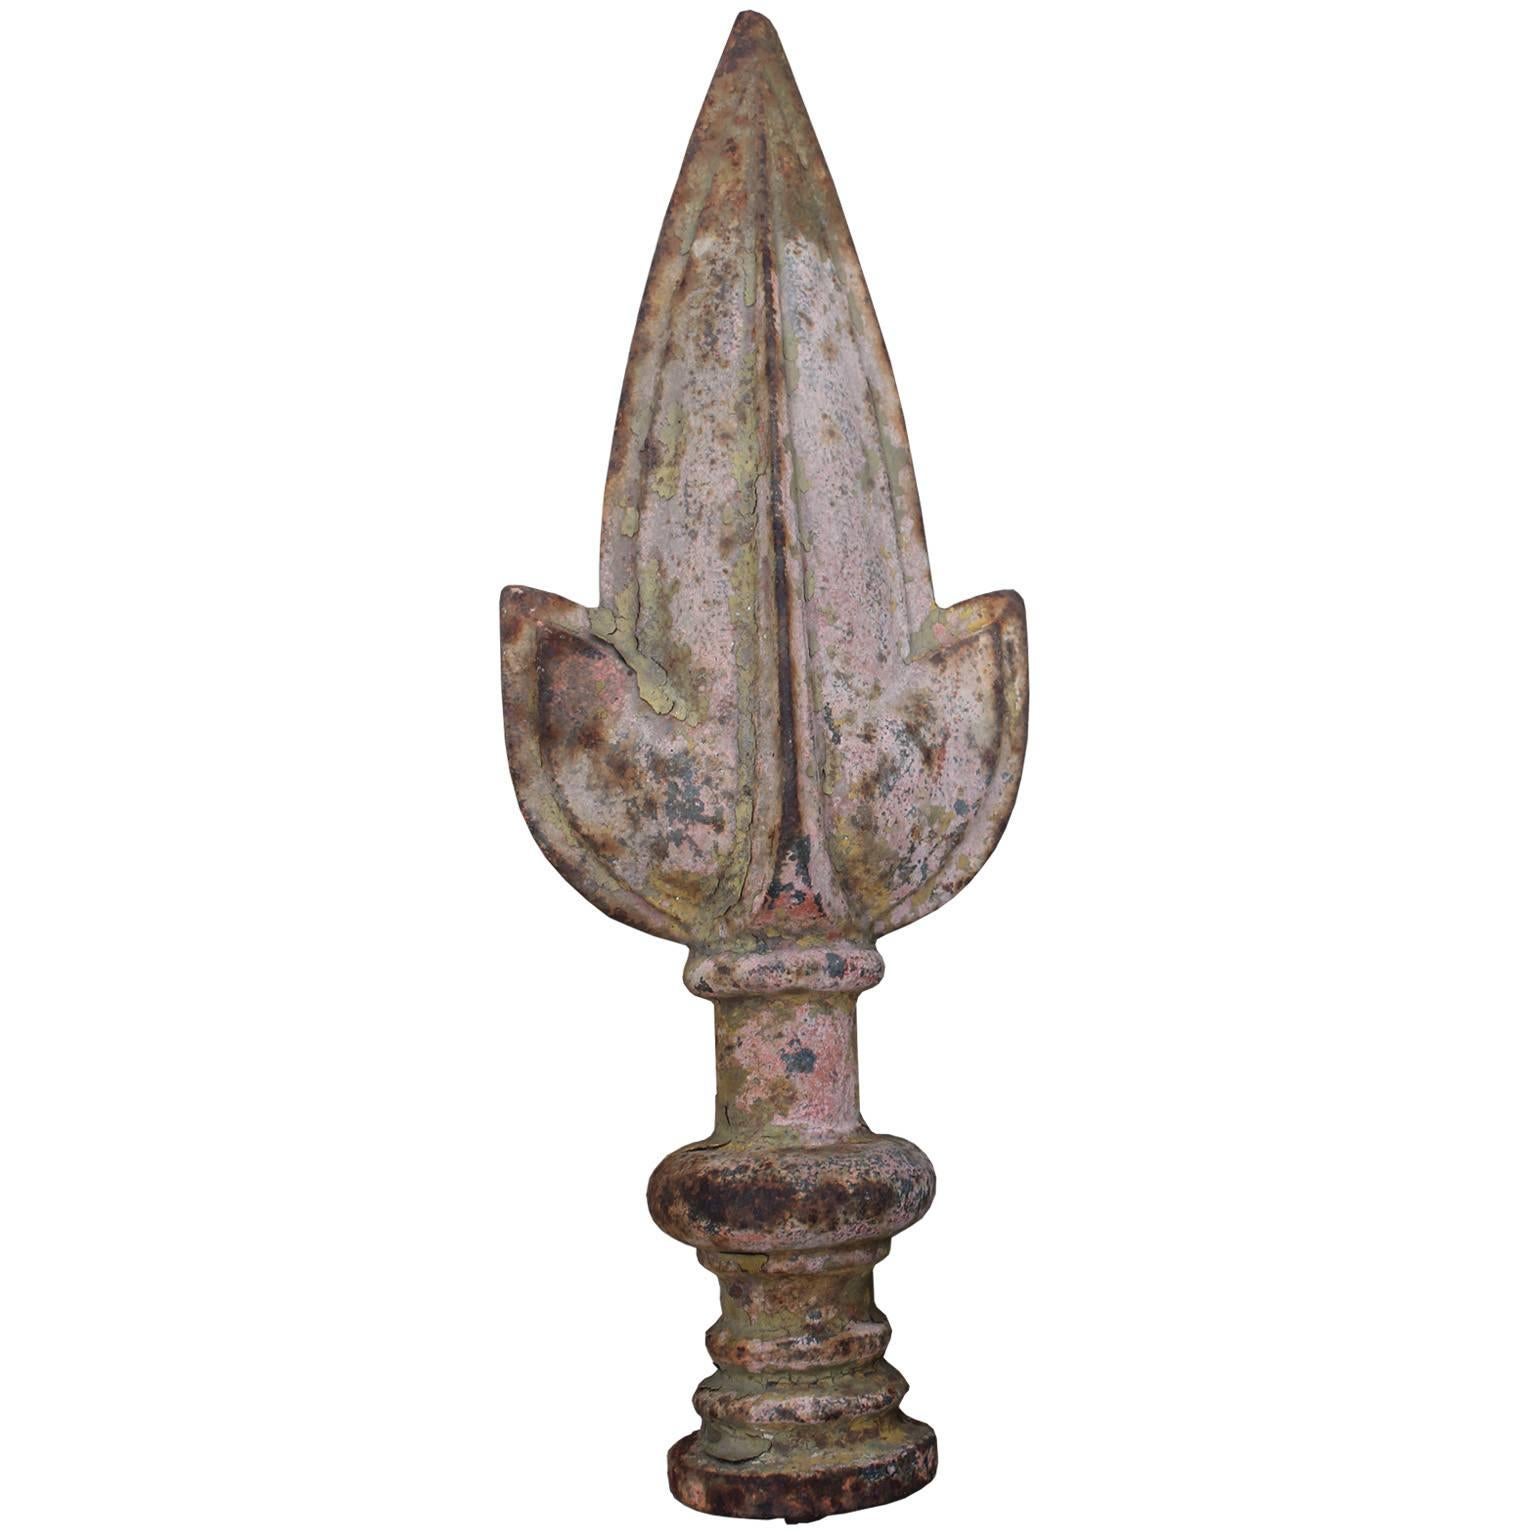 Stunning pair of finials with the perfect patina. French finials will add the perfect weathered touch to any space.